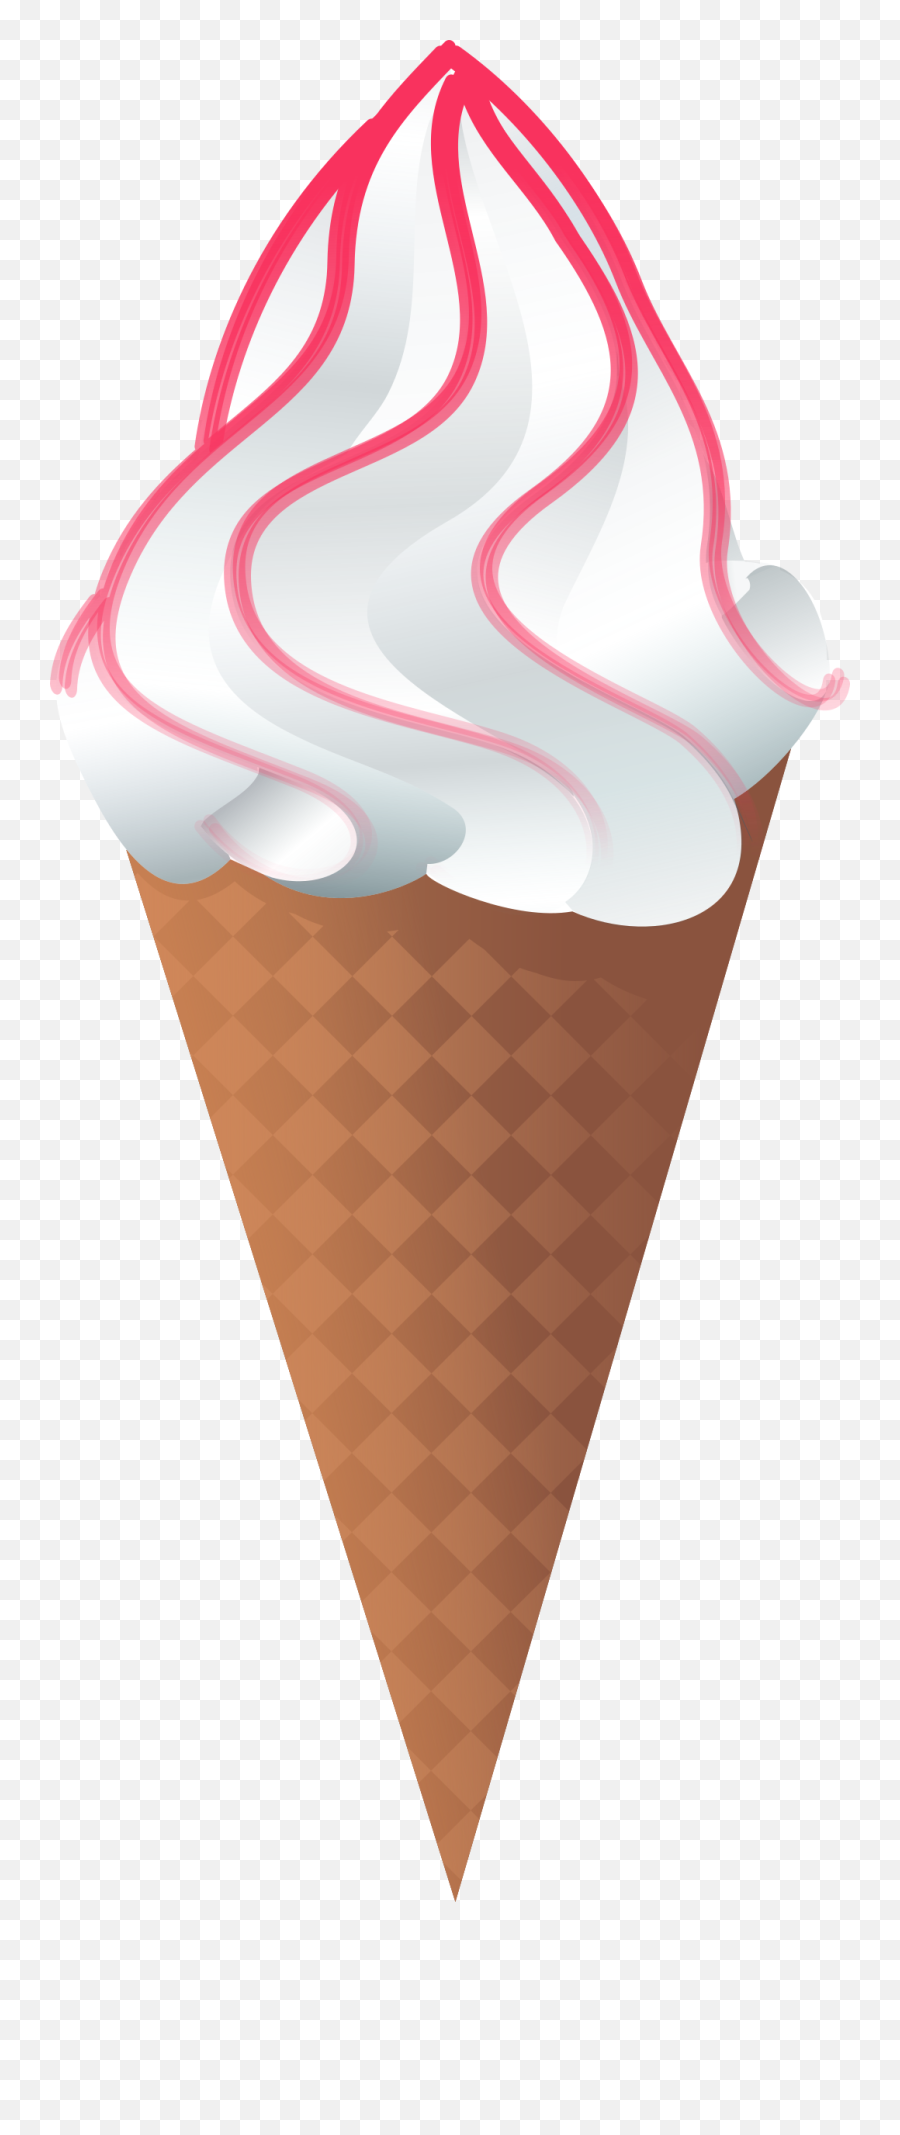 Ice Cream Cone Clip Art Summer Clipart Image 3 - Clipartbarn Ice Cream Cone Clipart Png,Summer Clipart Png